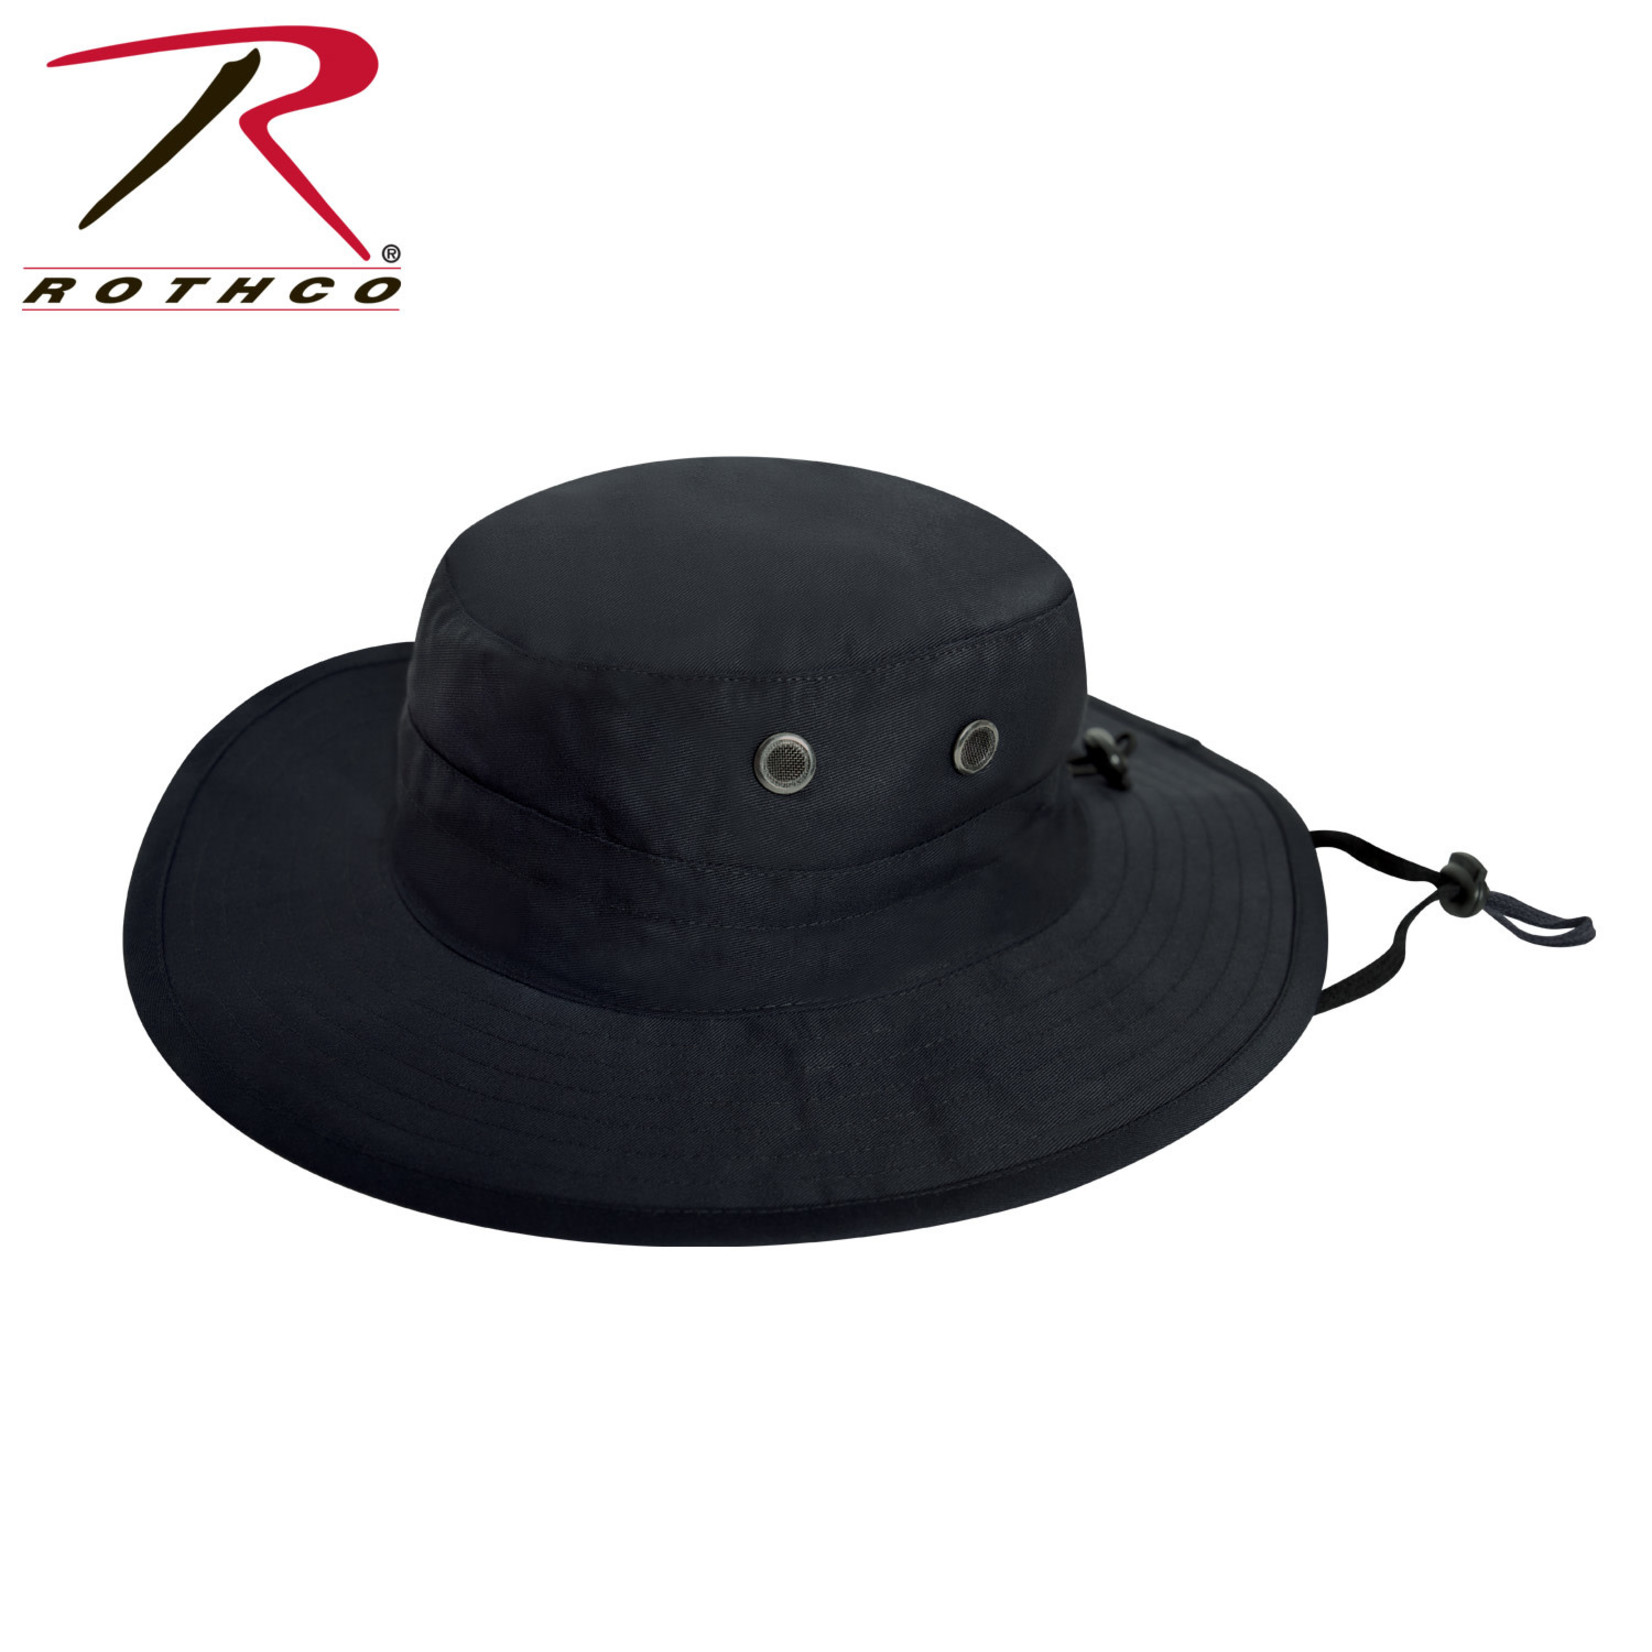 Rothco Rothco Adjustable Solid Color Boonie Hat